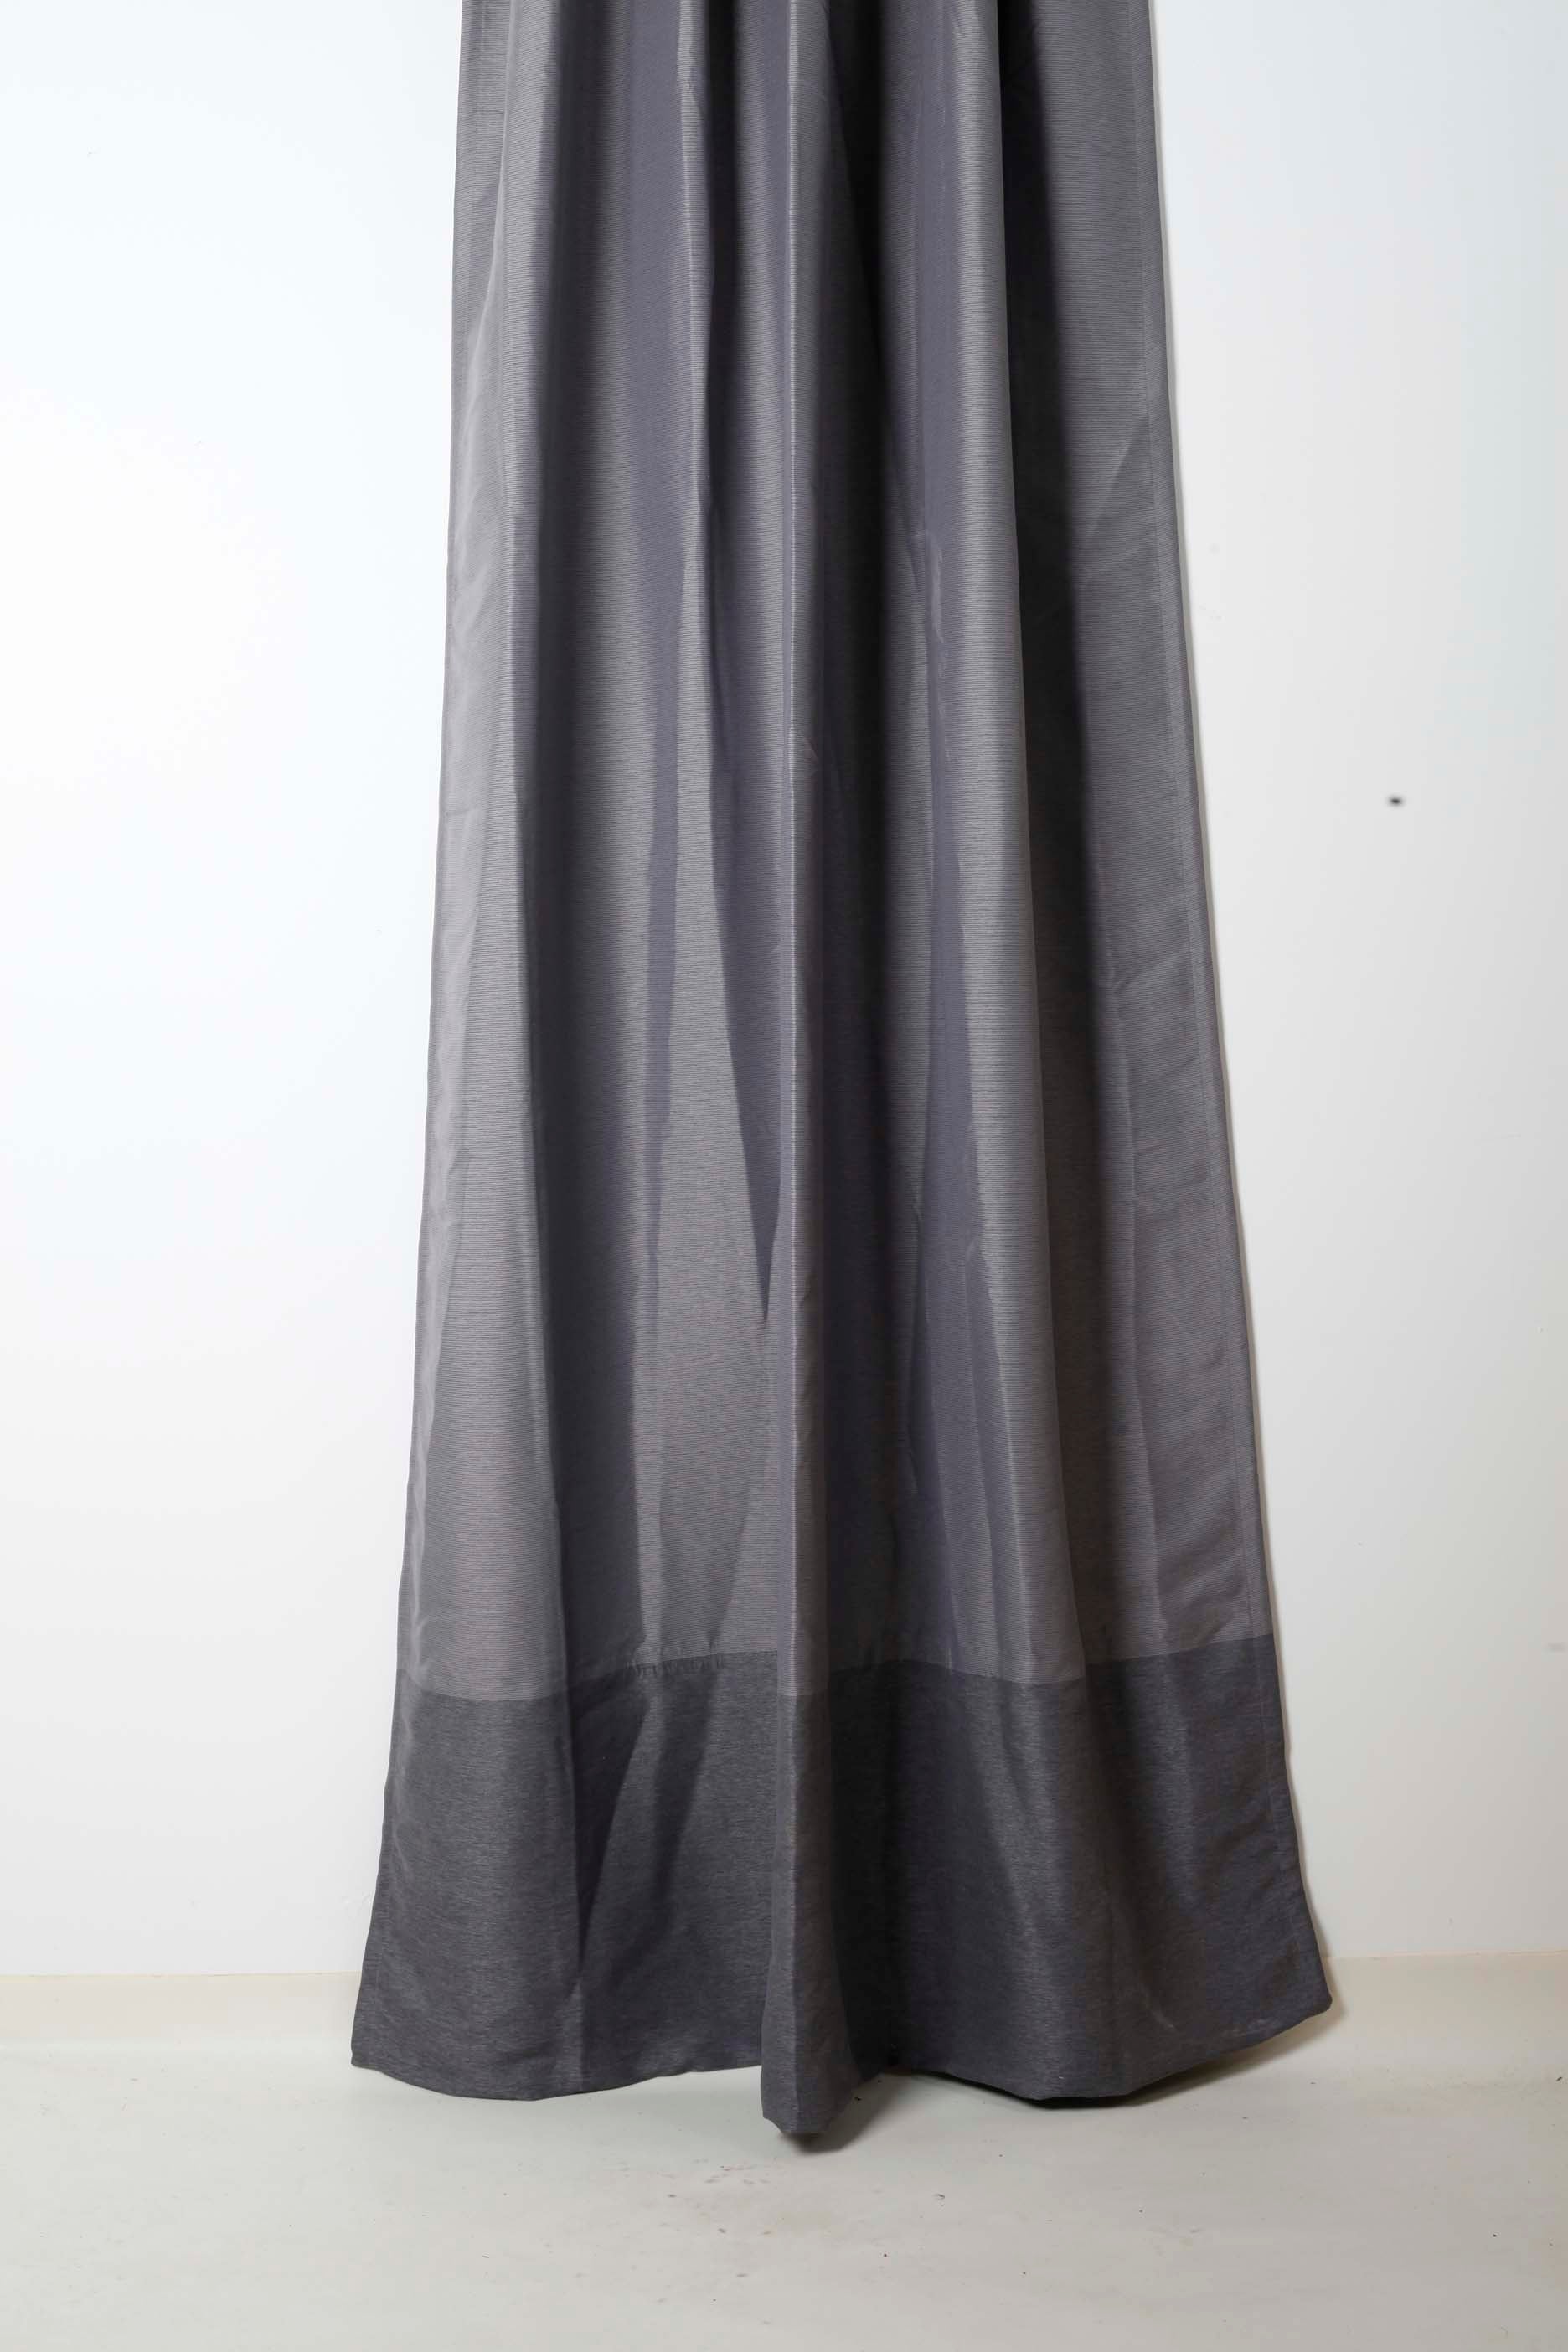 Grey Black-Out Curtain with Darker Panel